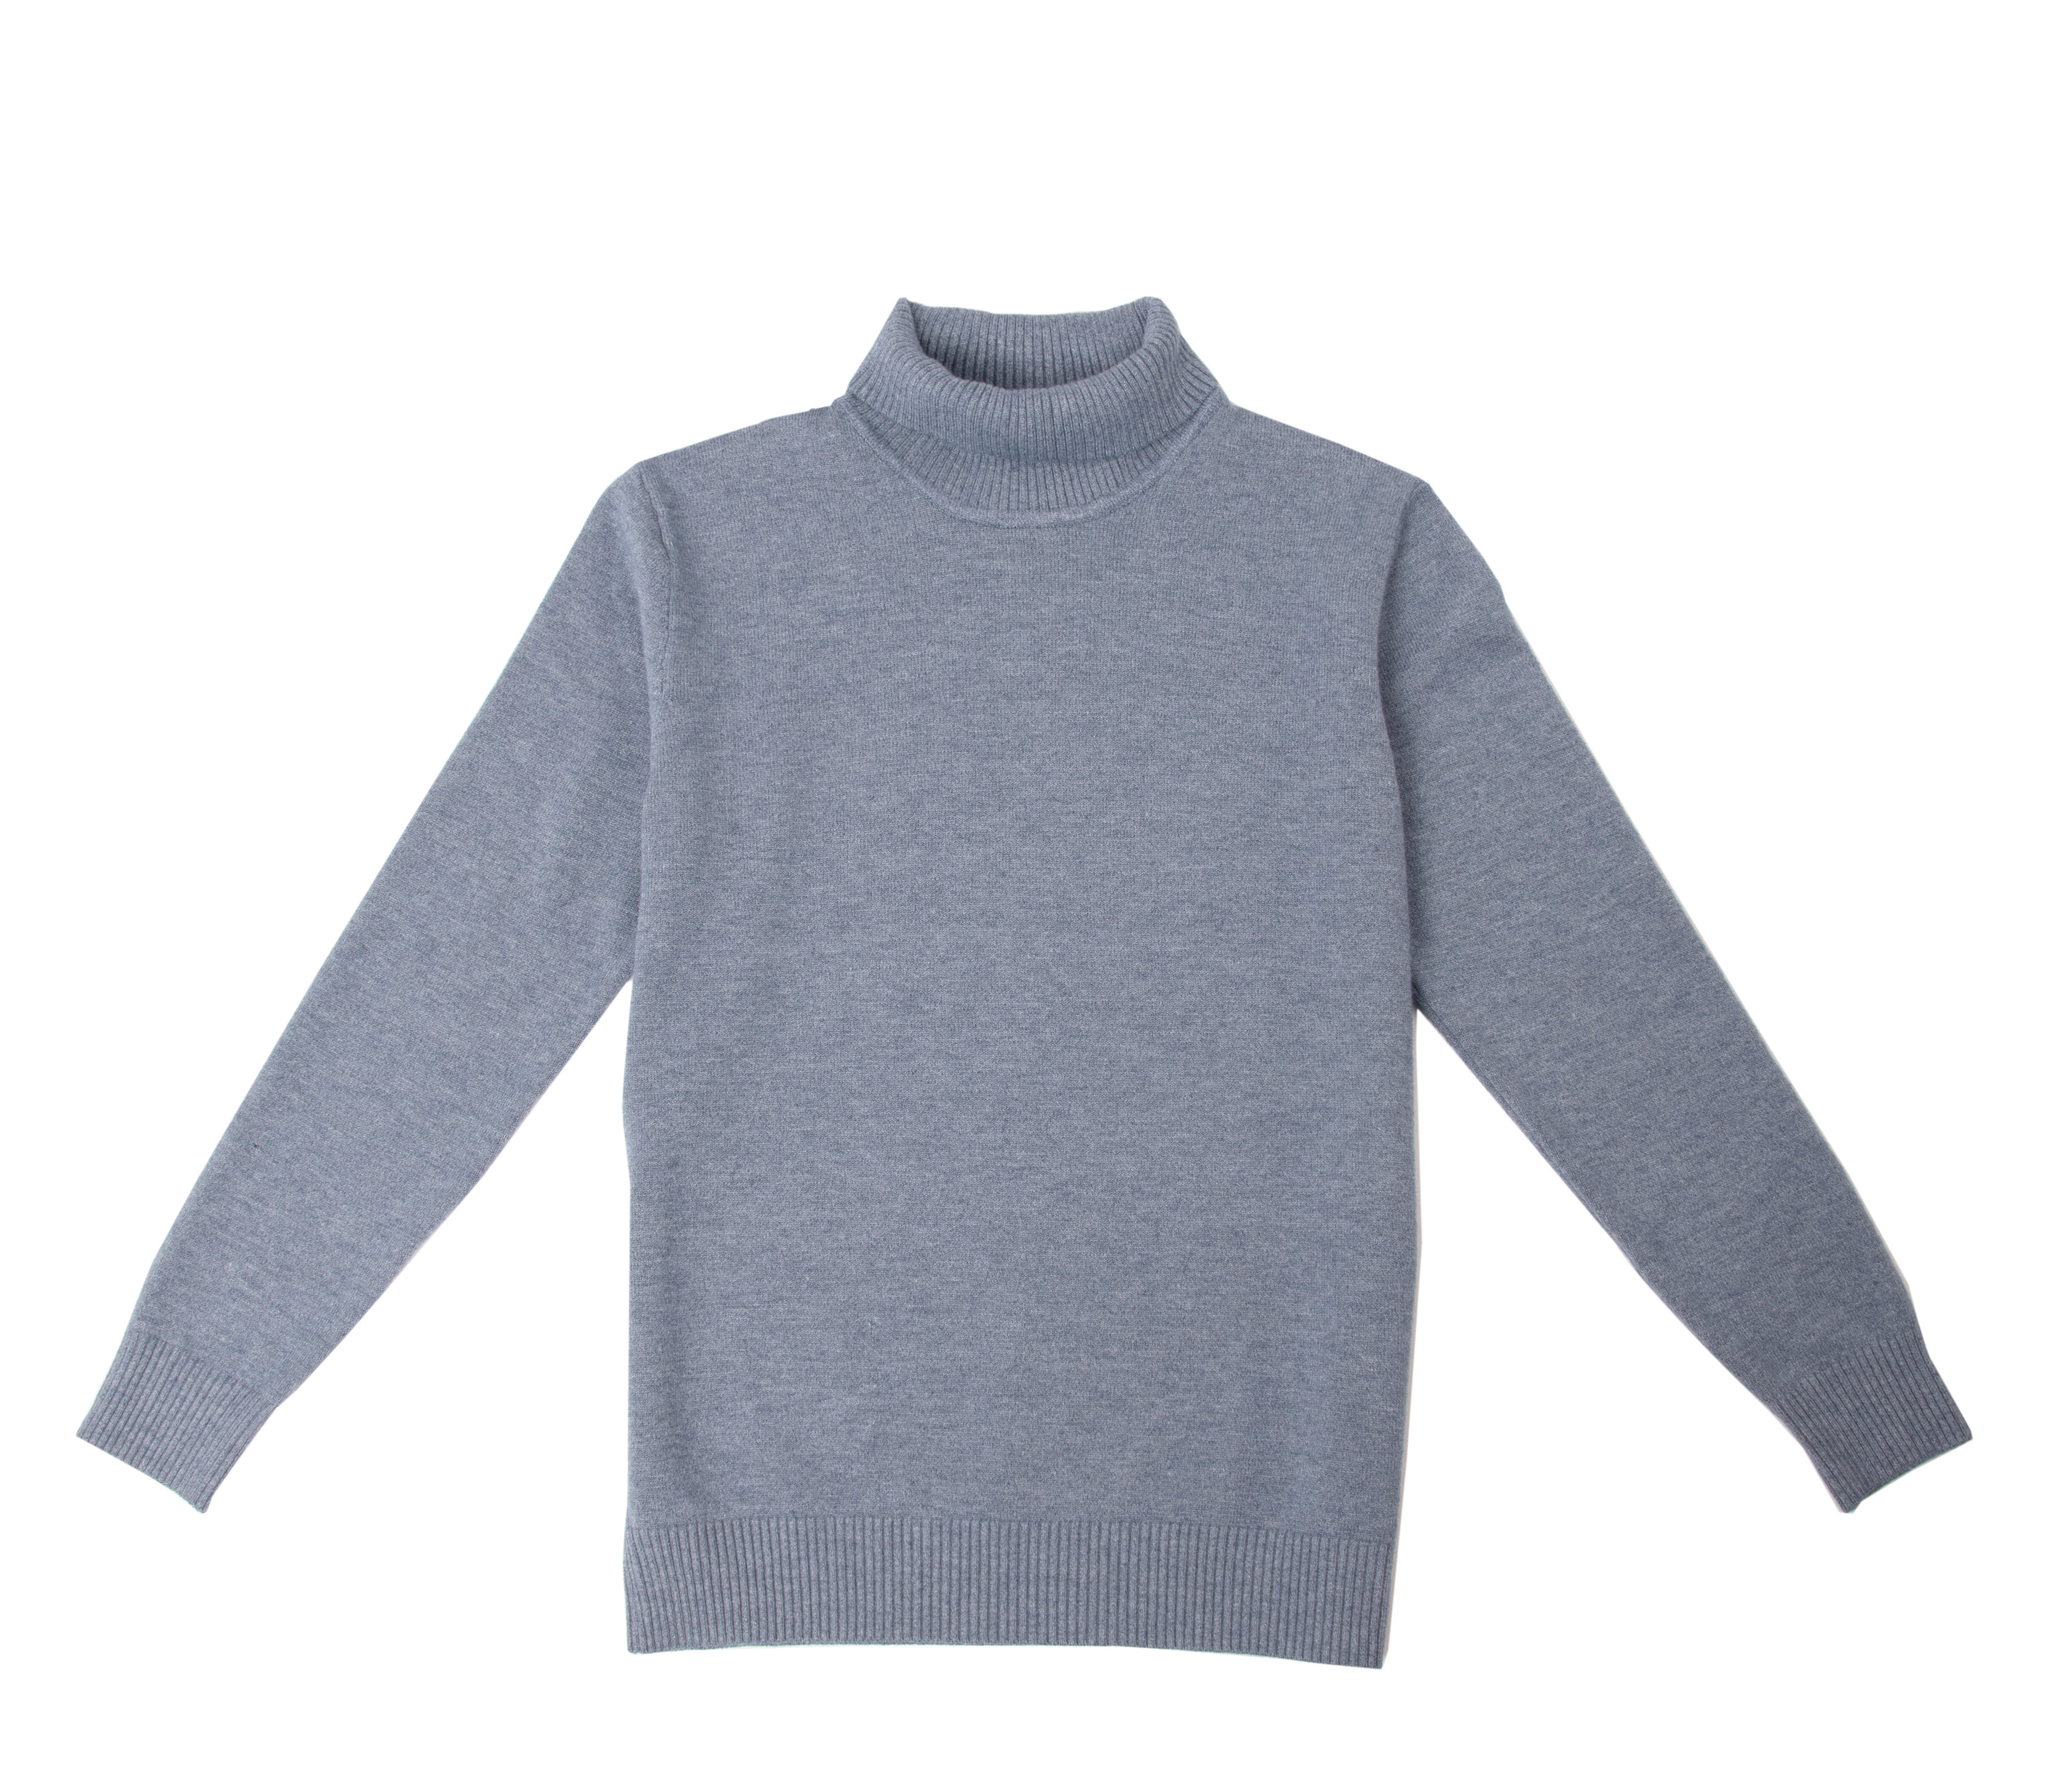 Soft Slim Fit Middleweight Pullover Sweaters for Kids X RAY Boys Crewneck Sweater 